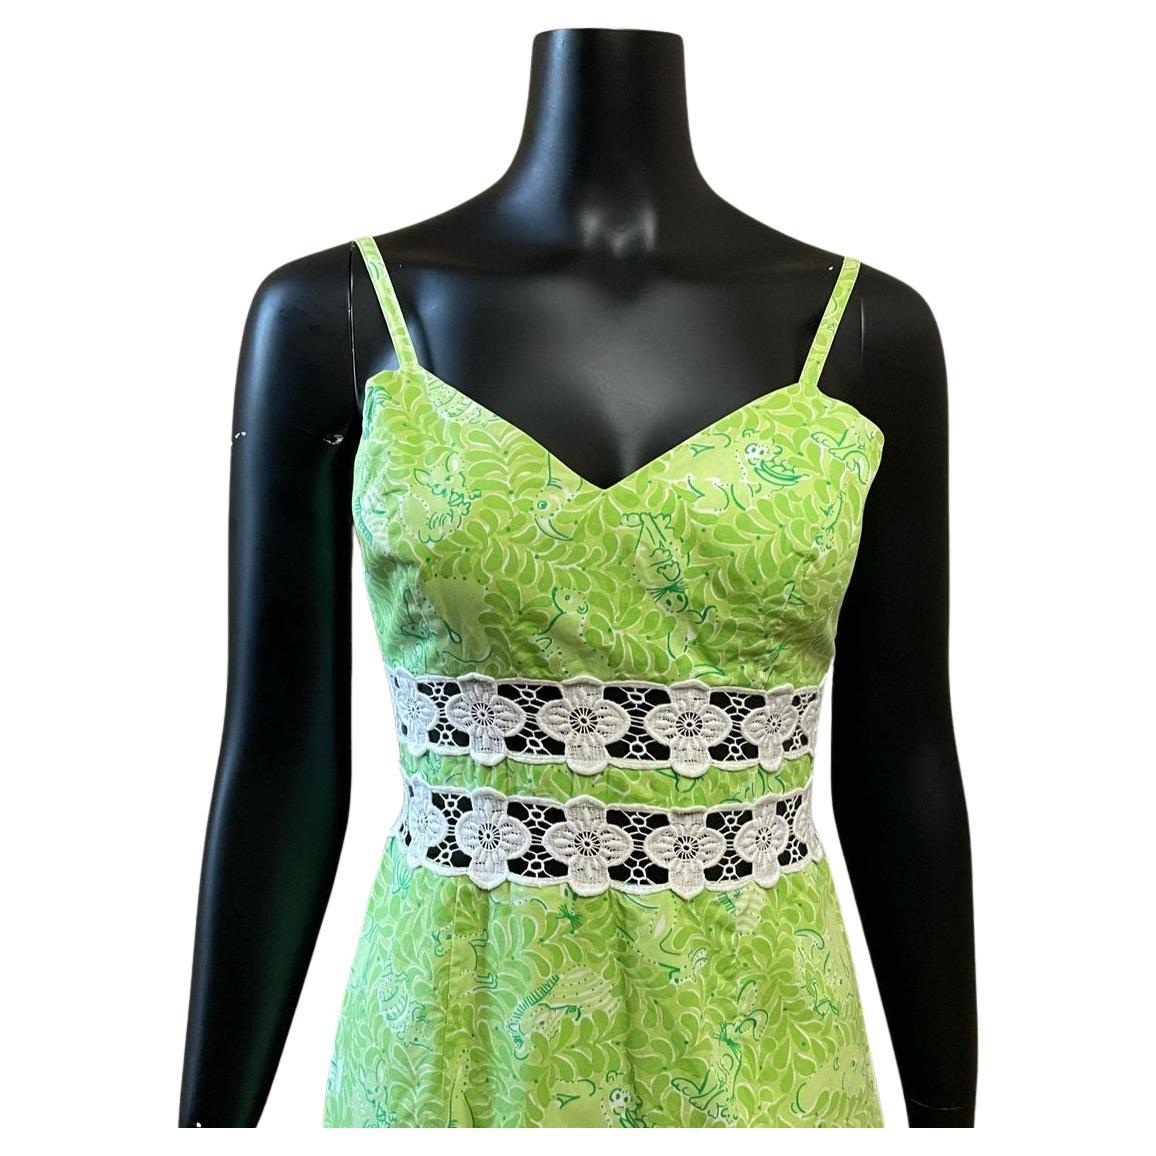 Vintage lime green and white mini dress. sheath silhouette with sweetheart neckline. cut out flower pattern midriff. adjustable spaghetti straps. woodland creatures hidden in leafy forest print. back zip closure.

Circa 1990s
Lilly Pulitzer
Tagged